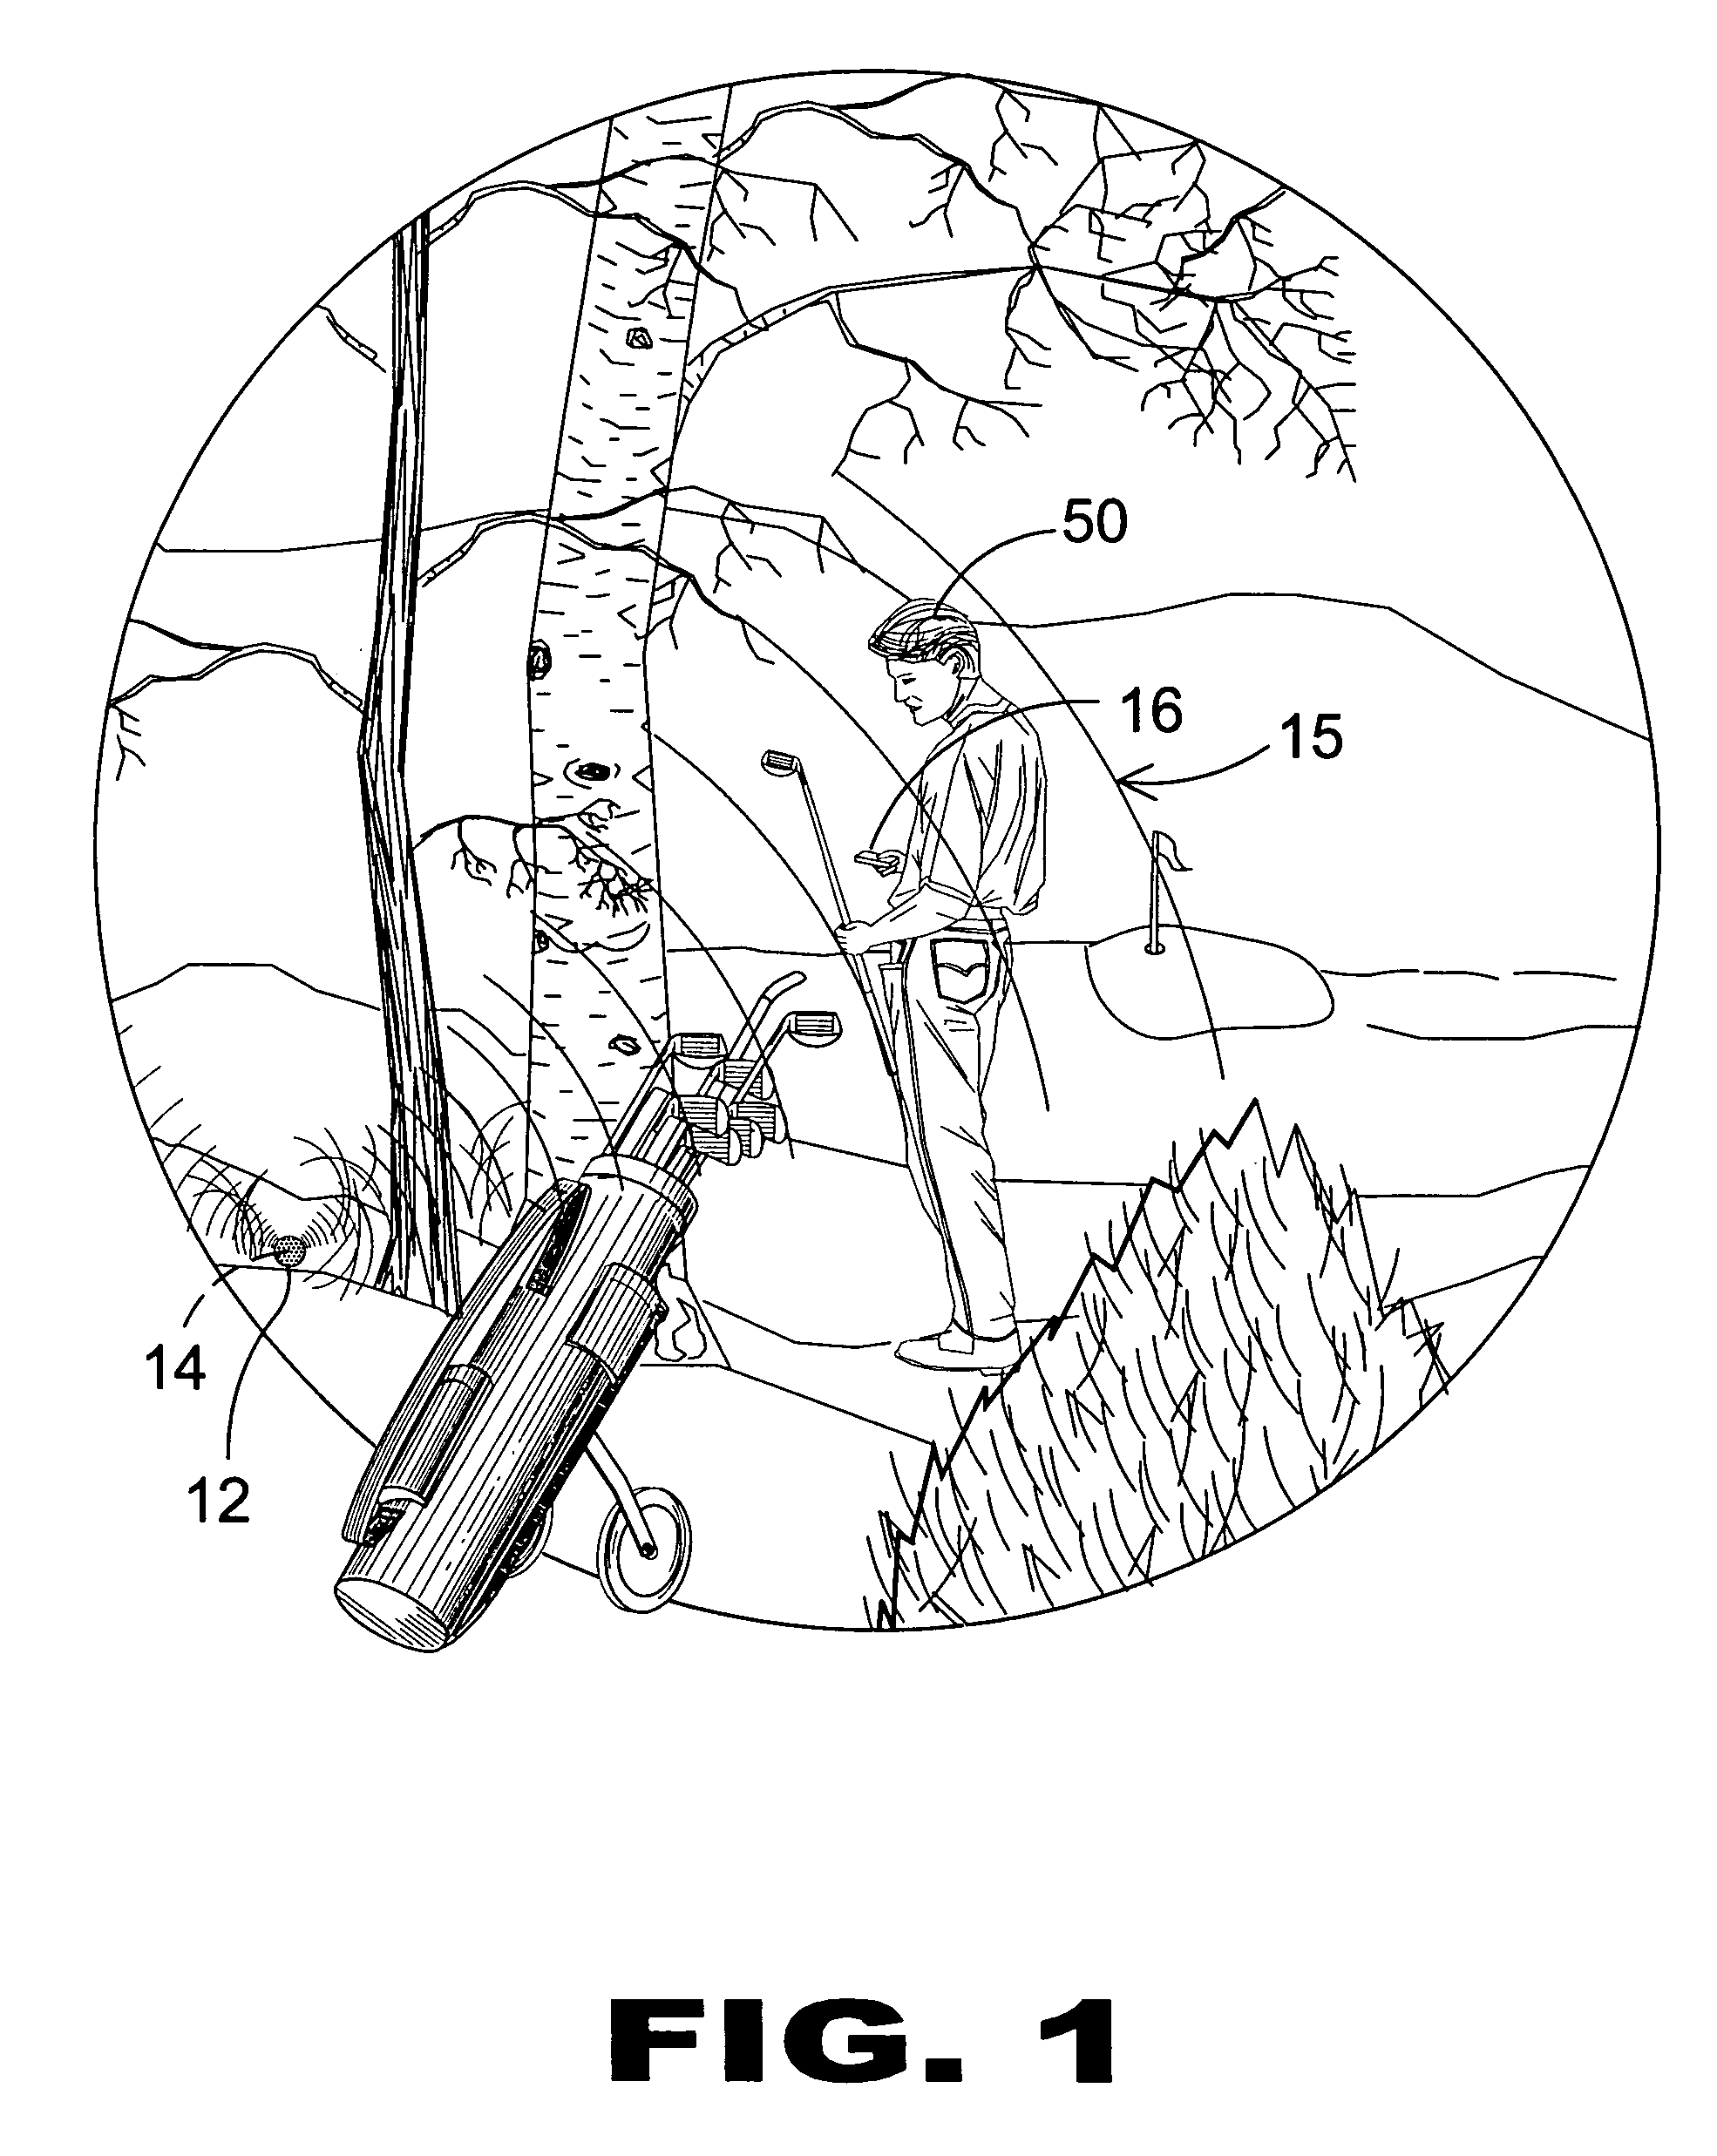 Method and apparatus for locating and recording the position of a golf ball during a golf game